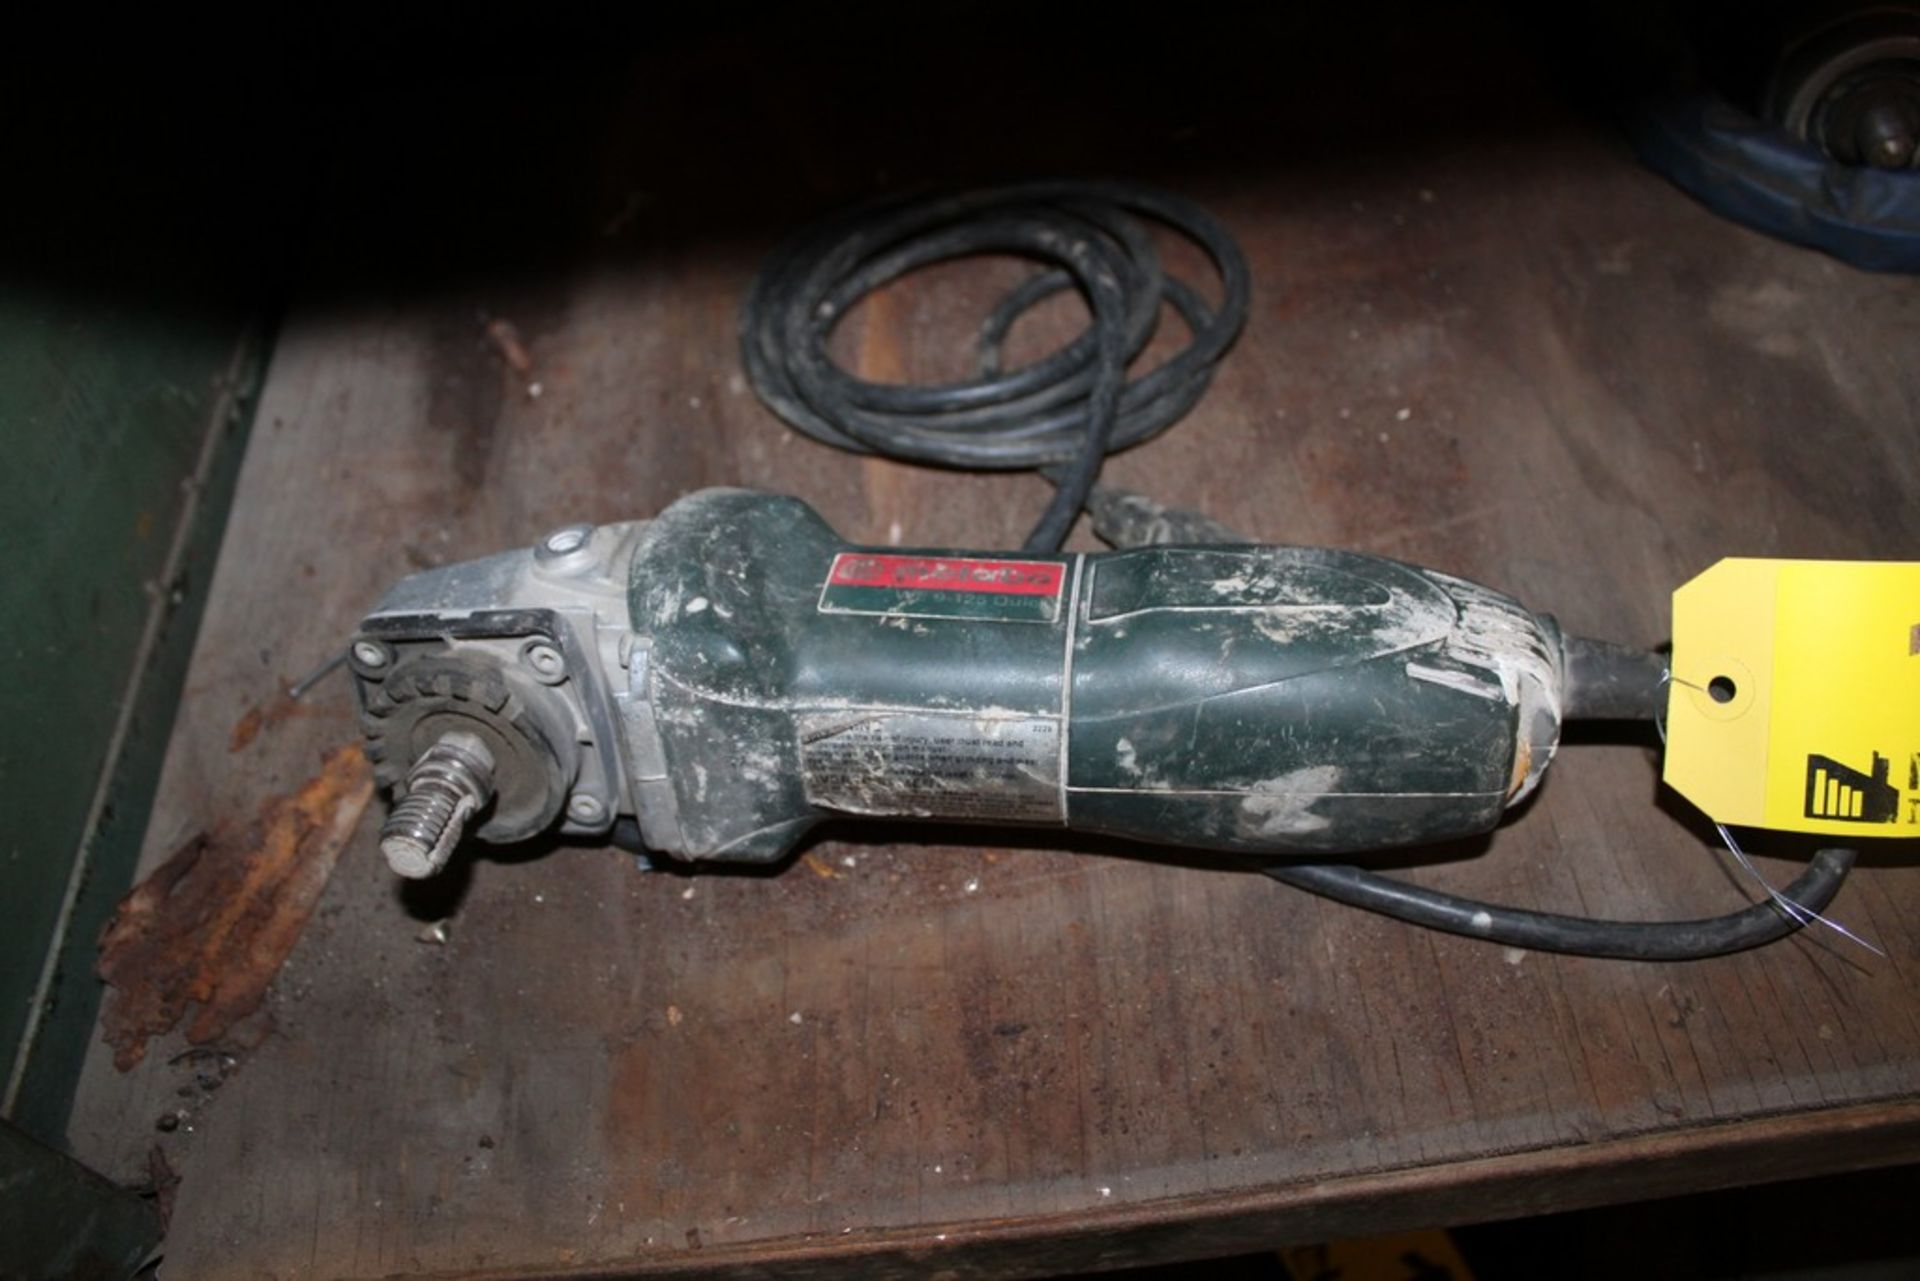 METABO WE9-125, 4-1/2" RIGHT ANGLE GRINDER